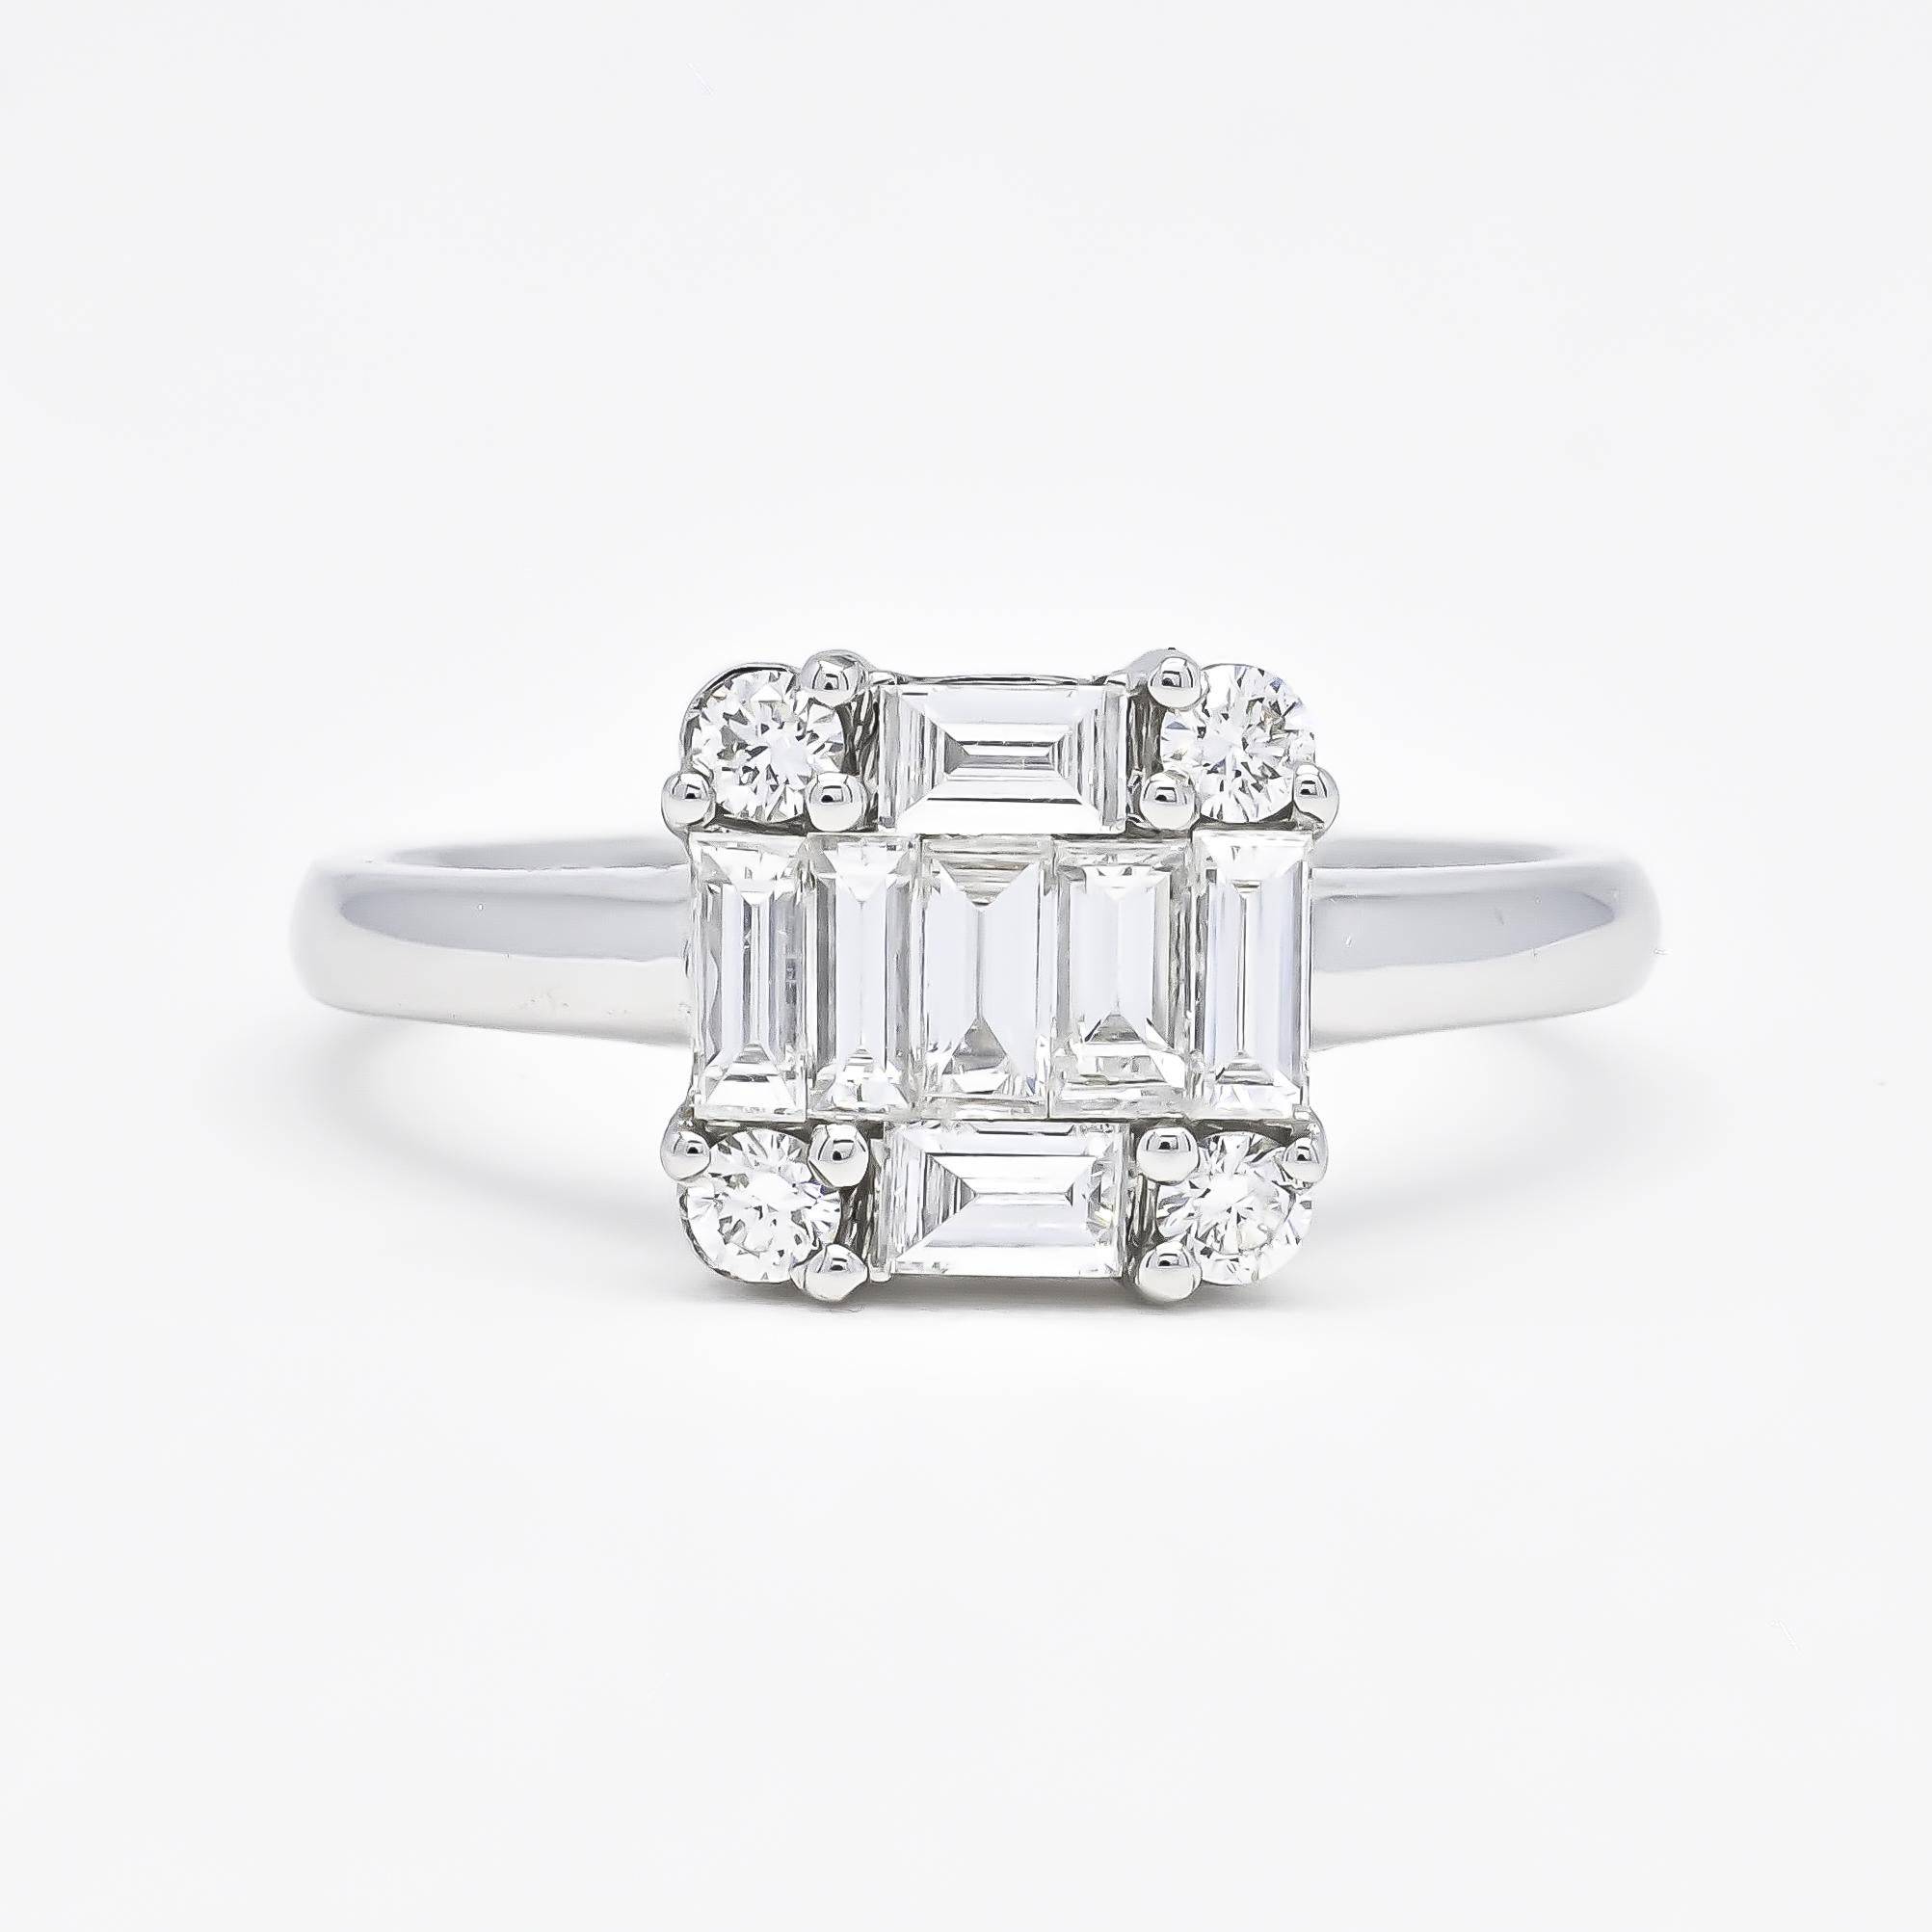 The Natural Diamond Ring with a 18KT White Gold Square Cluster design is a stunning and sophisticated choice for an engagement ring. The ring features a minimalist design, with a mix of baguette and round diamonds in a cluster setting, adding extra